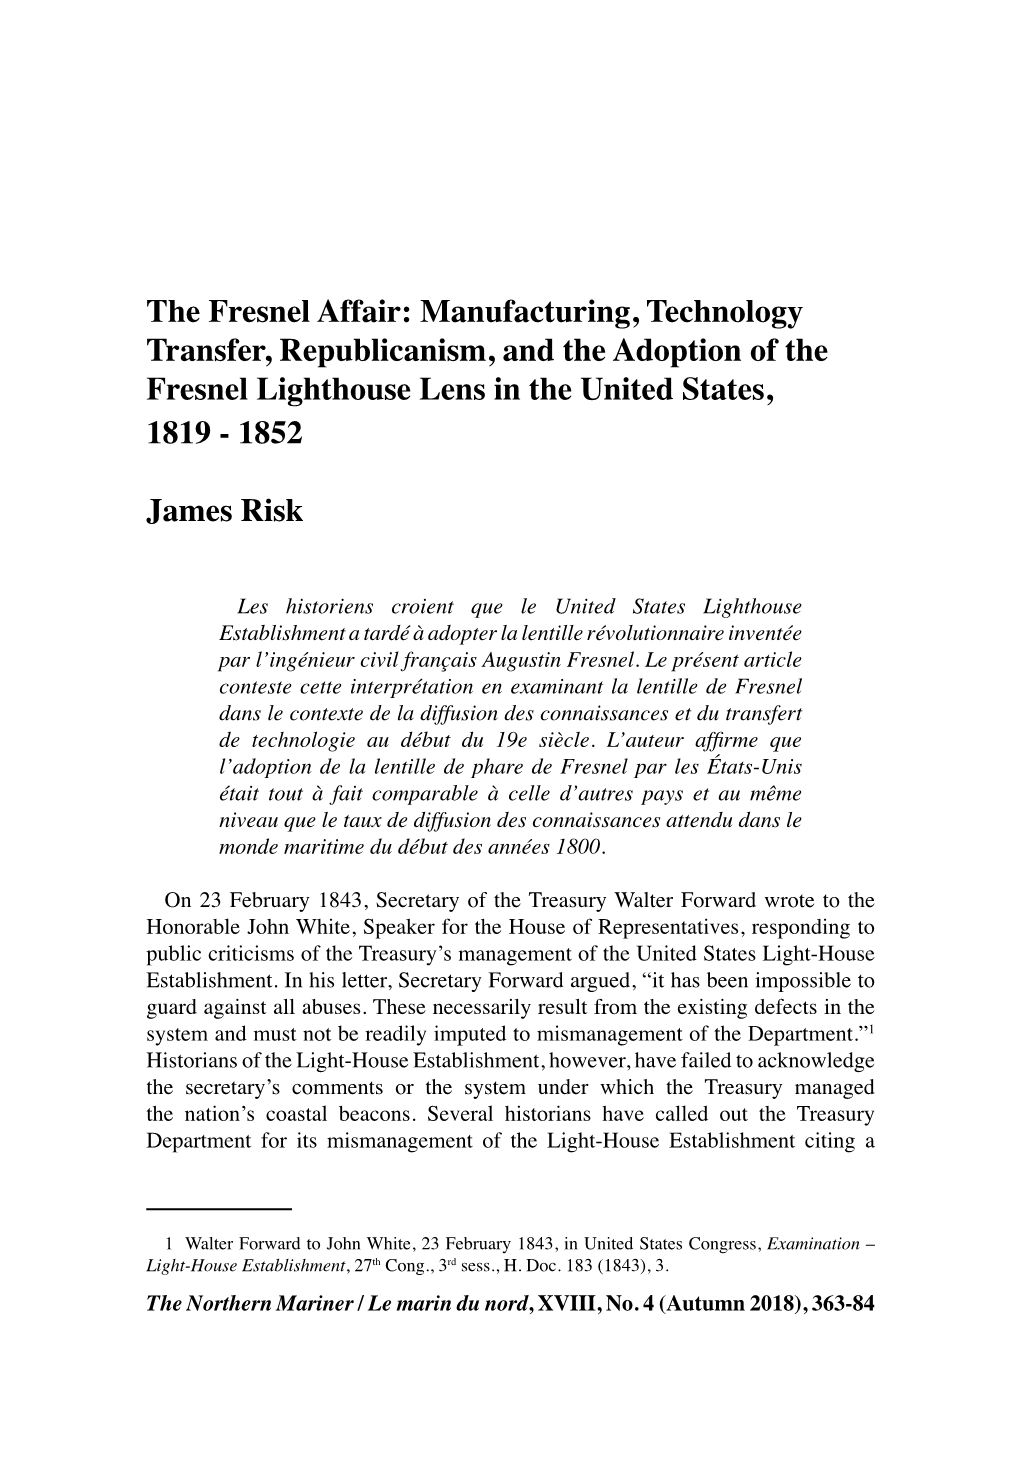 The Fresnel Affair: Manufacturing, Technology Transfer, Republicanism, and the Adoption of the Fresnel Lighthouse Lens in the United States, 1819 - 1852